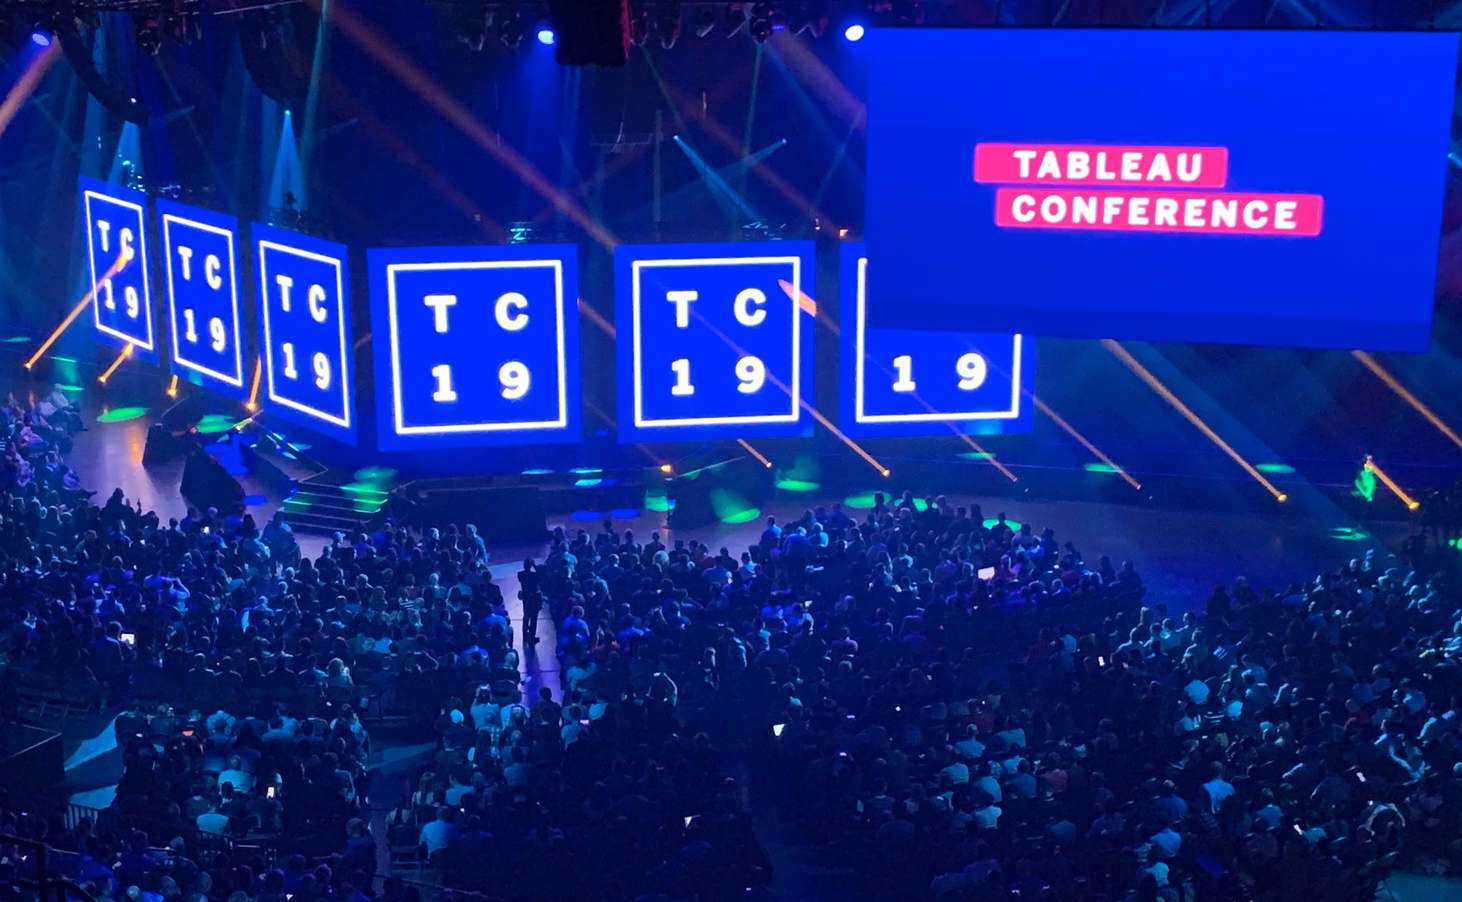 Insights from Tableau Conference 2019